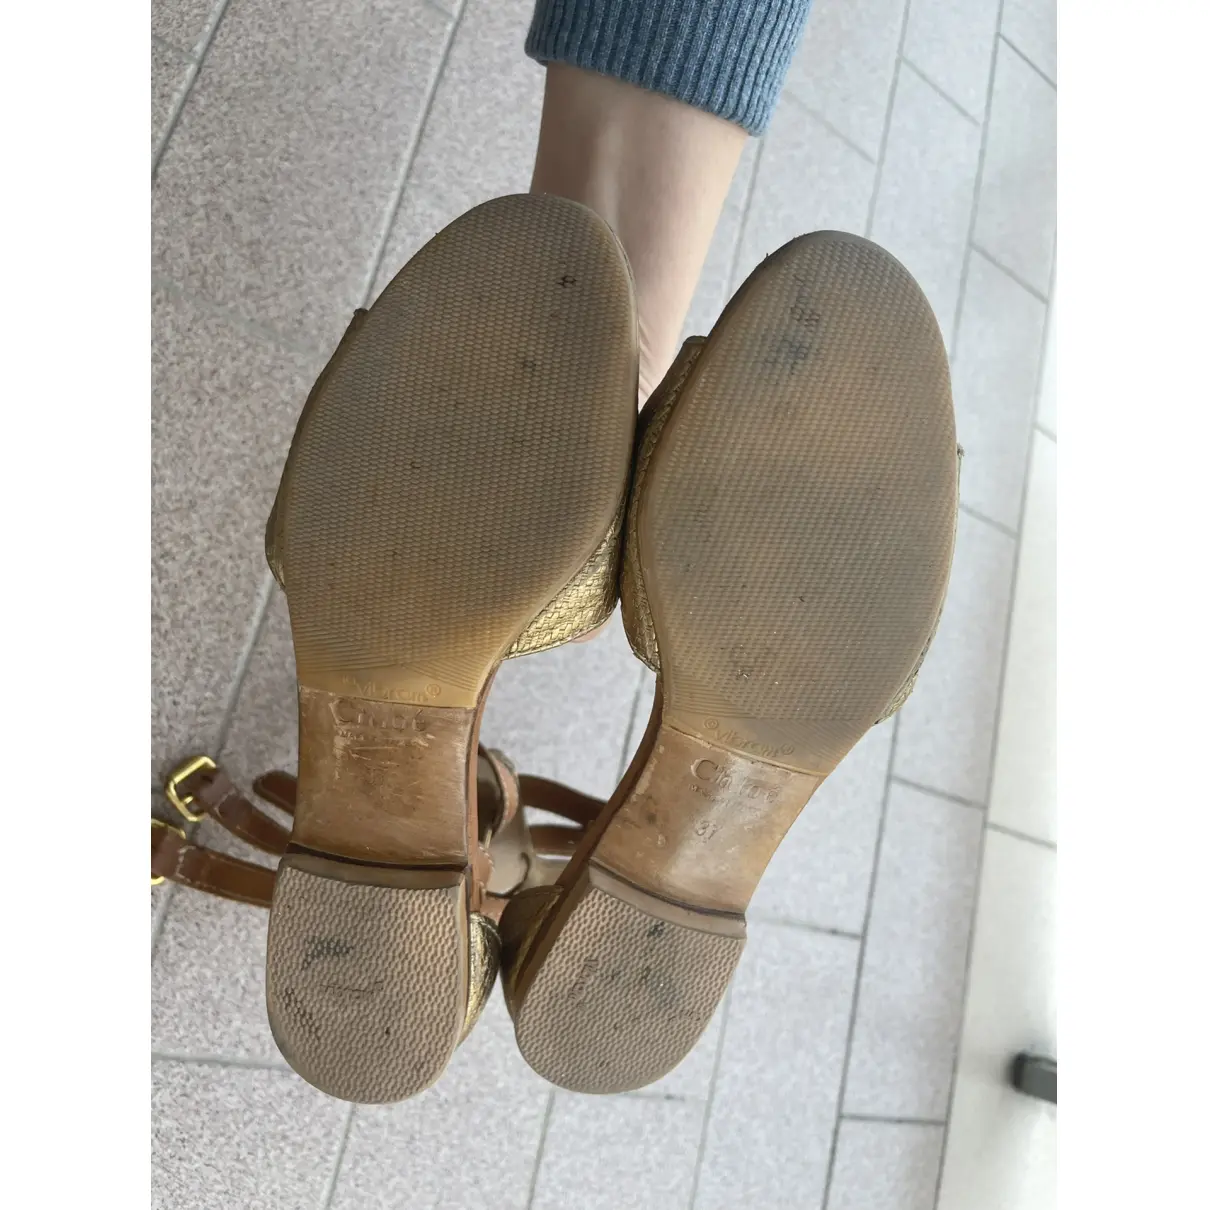 Buy Chloé Leather mules online